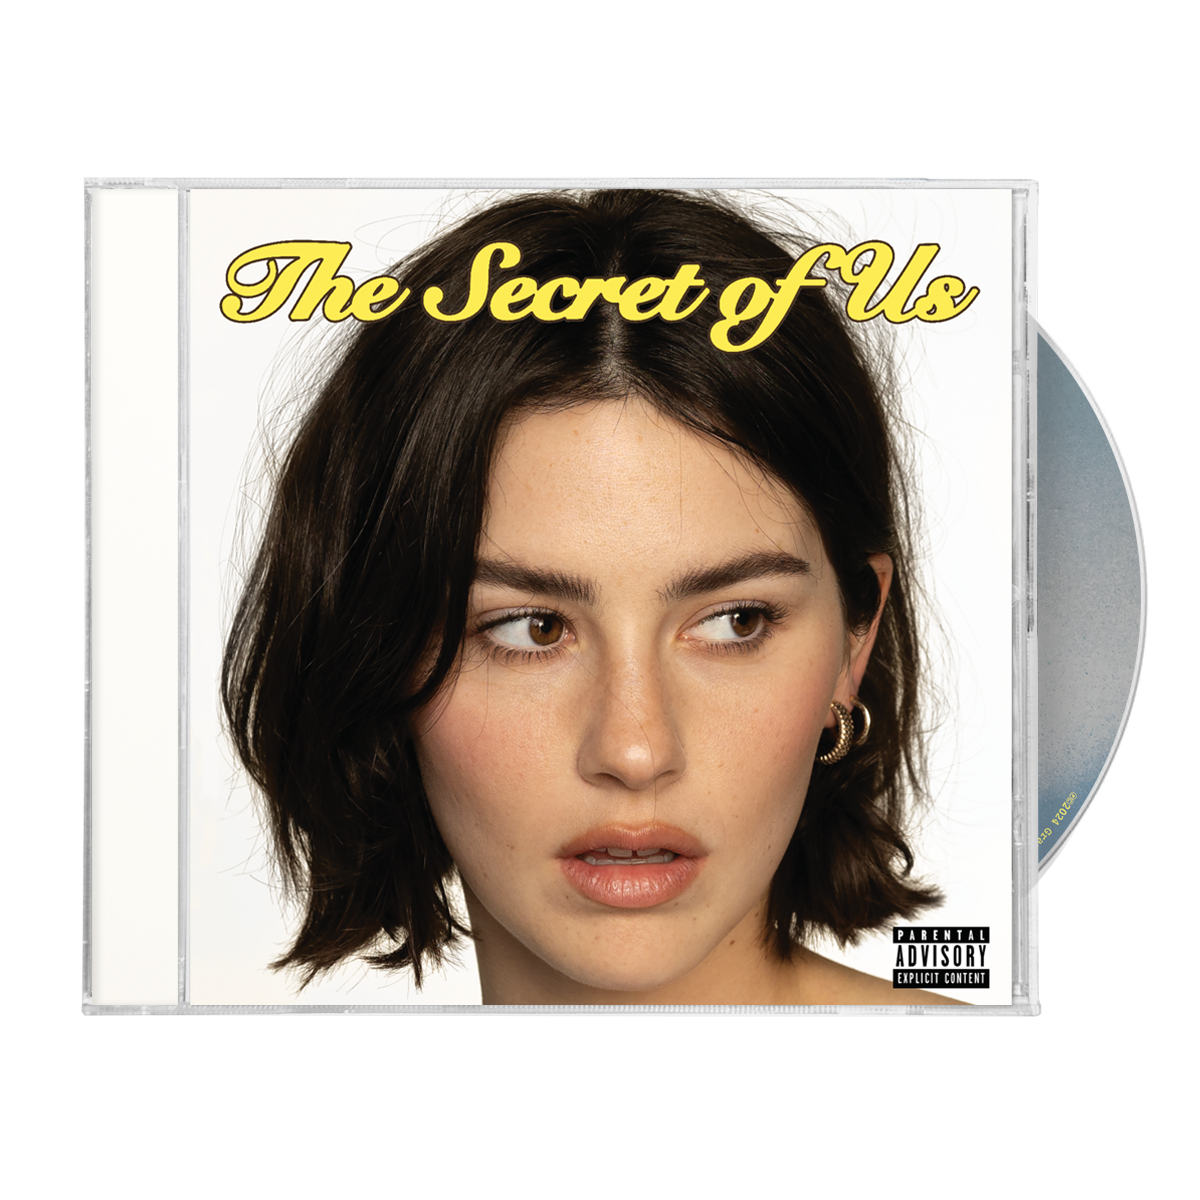 The Secret Of Us: Yellow Vinyl LP, CD, Risk / Close To You 7" Single + Signed Art Card